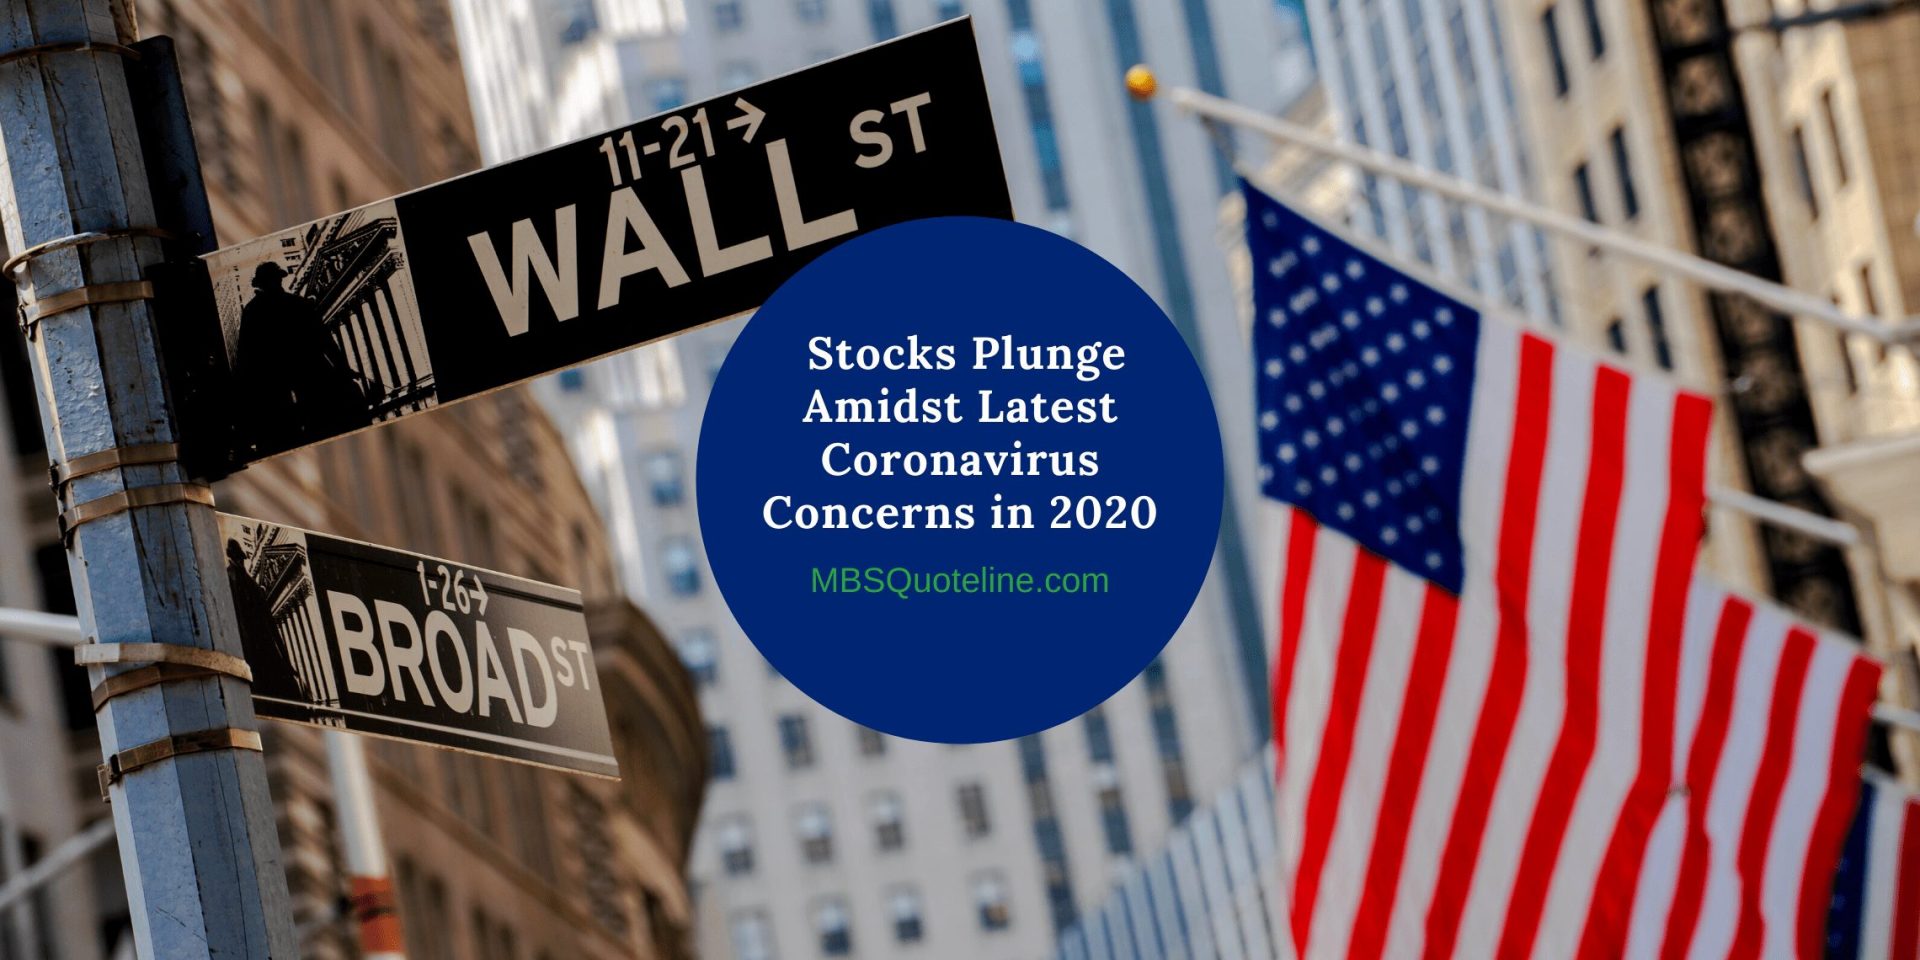 Stocks Plunge Amidst Latest Coronavirus Concerns in 2020 featured mortgagetime mbsquoteline